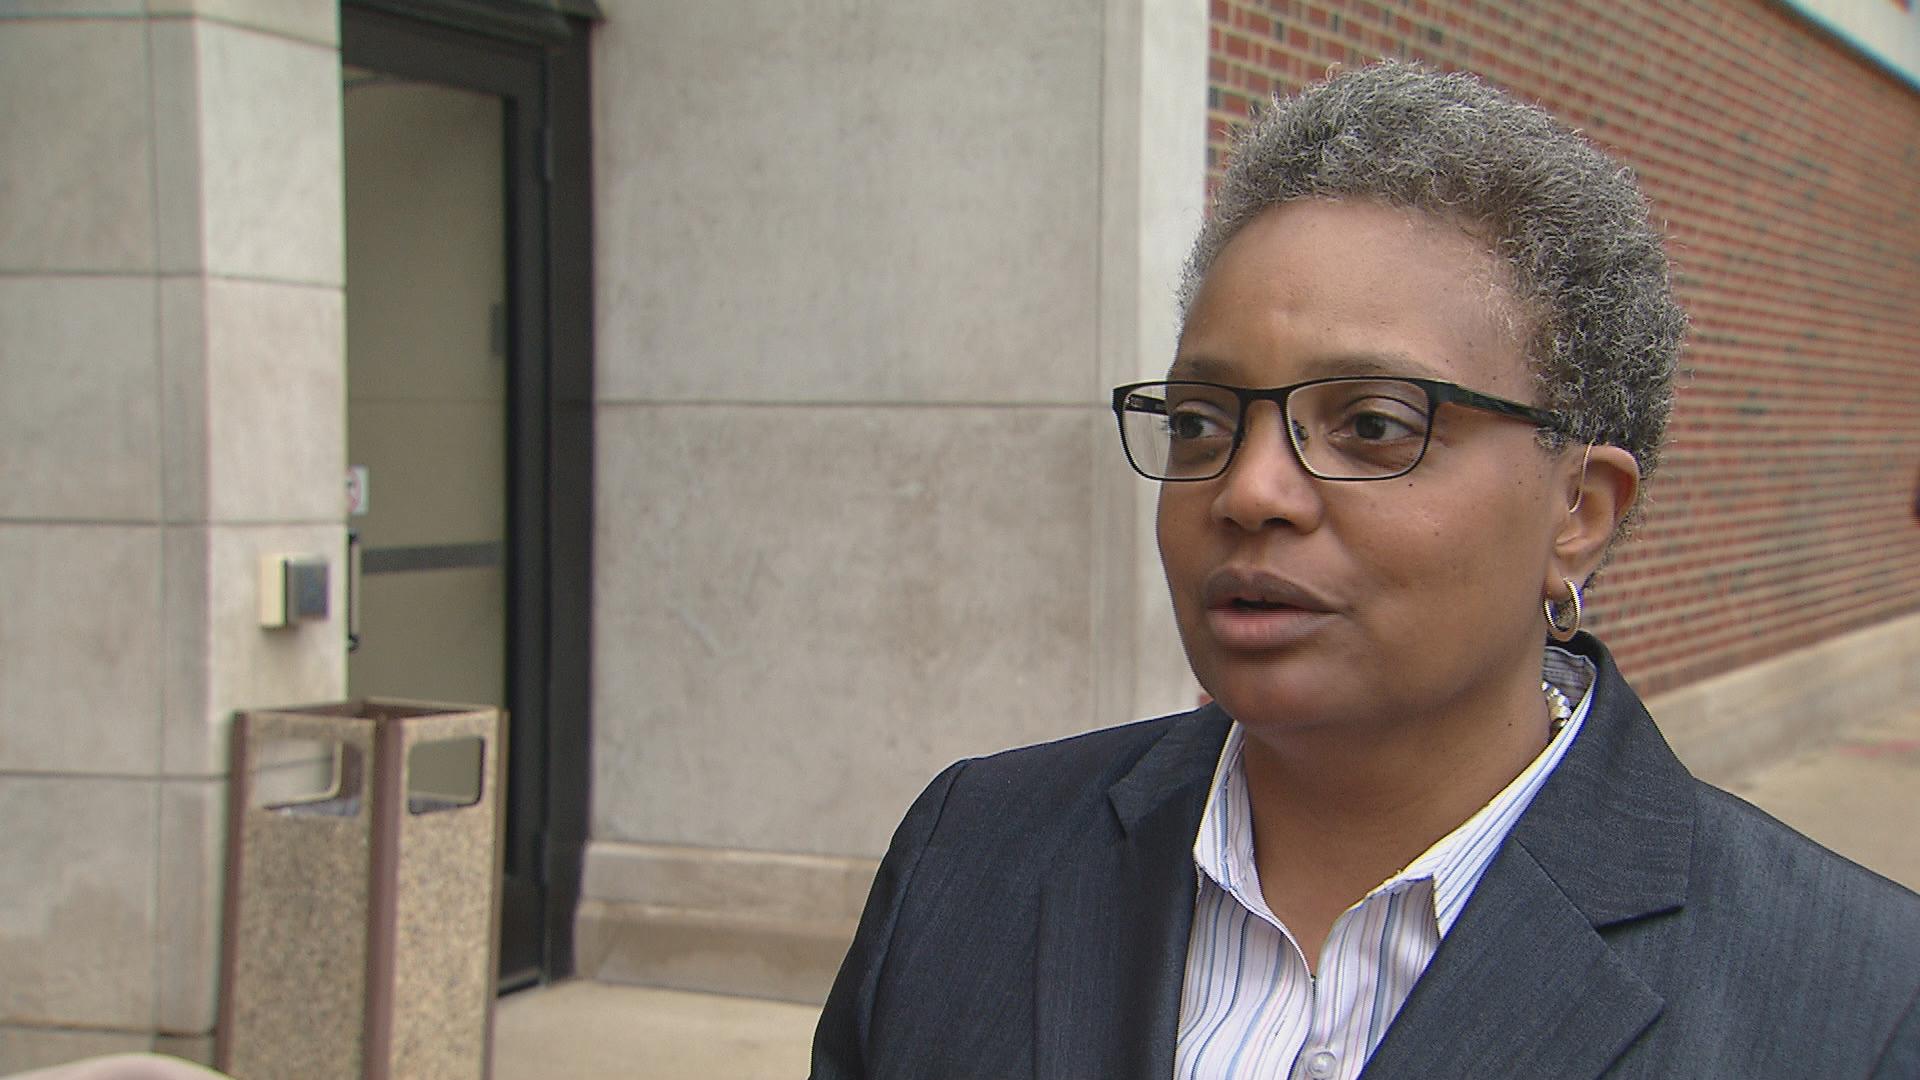 Lori Lightfoot: “There are forces in this state that don’t want to have the people have a say in how legislative districts are drawn.”